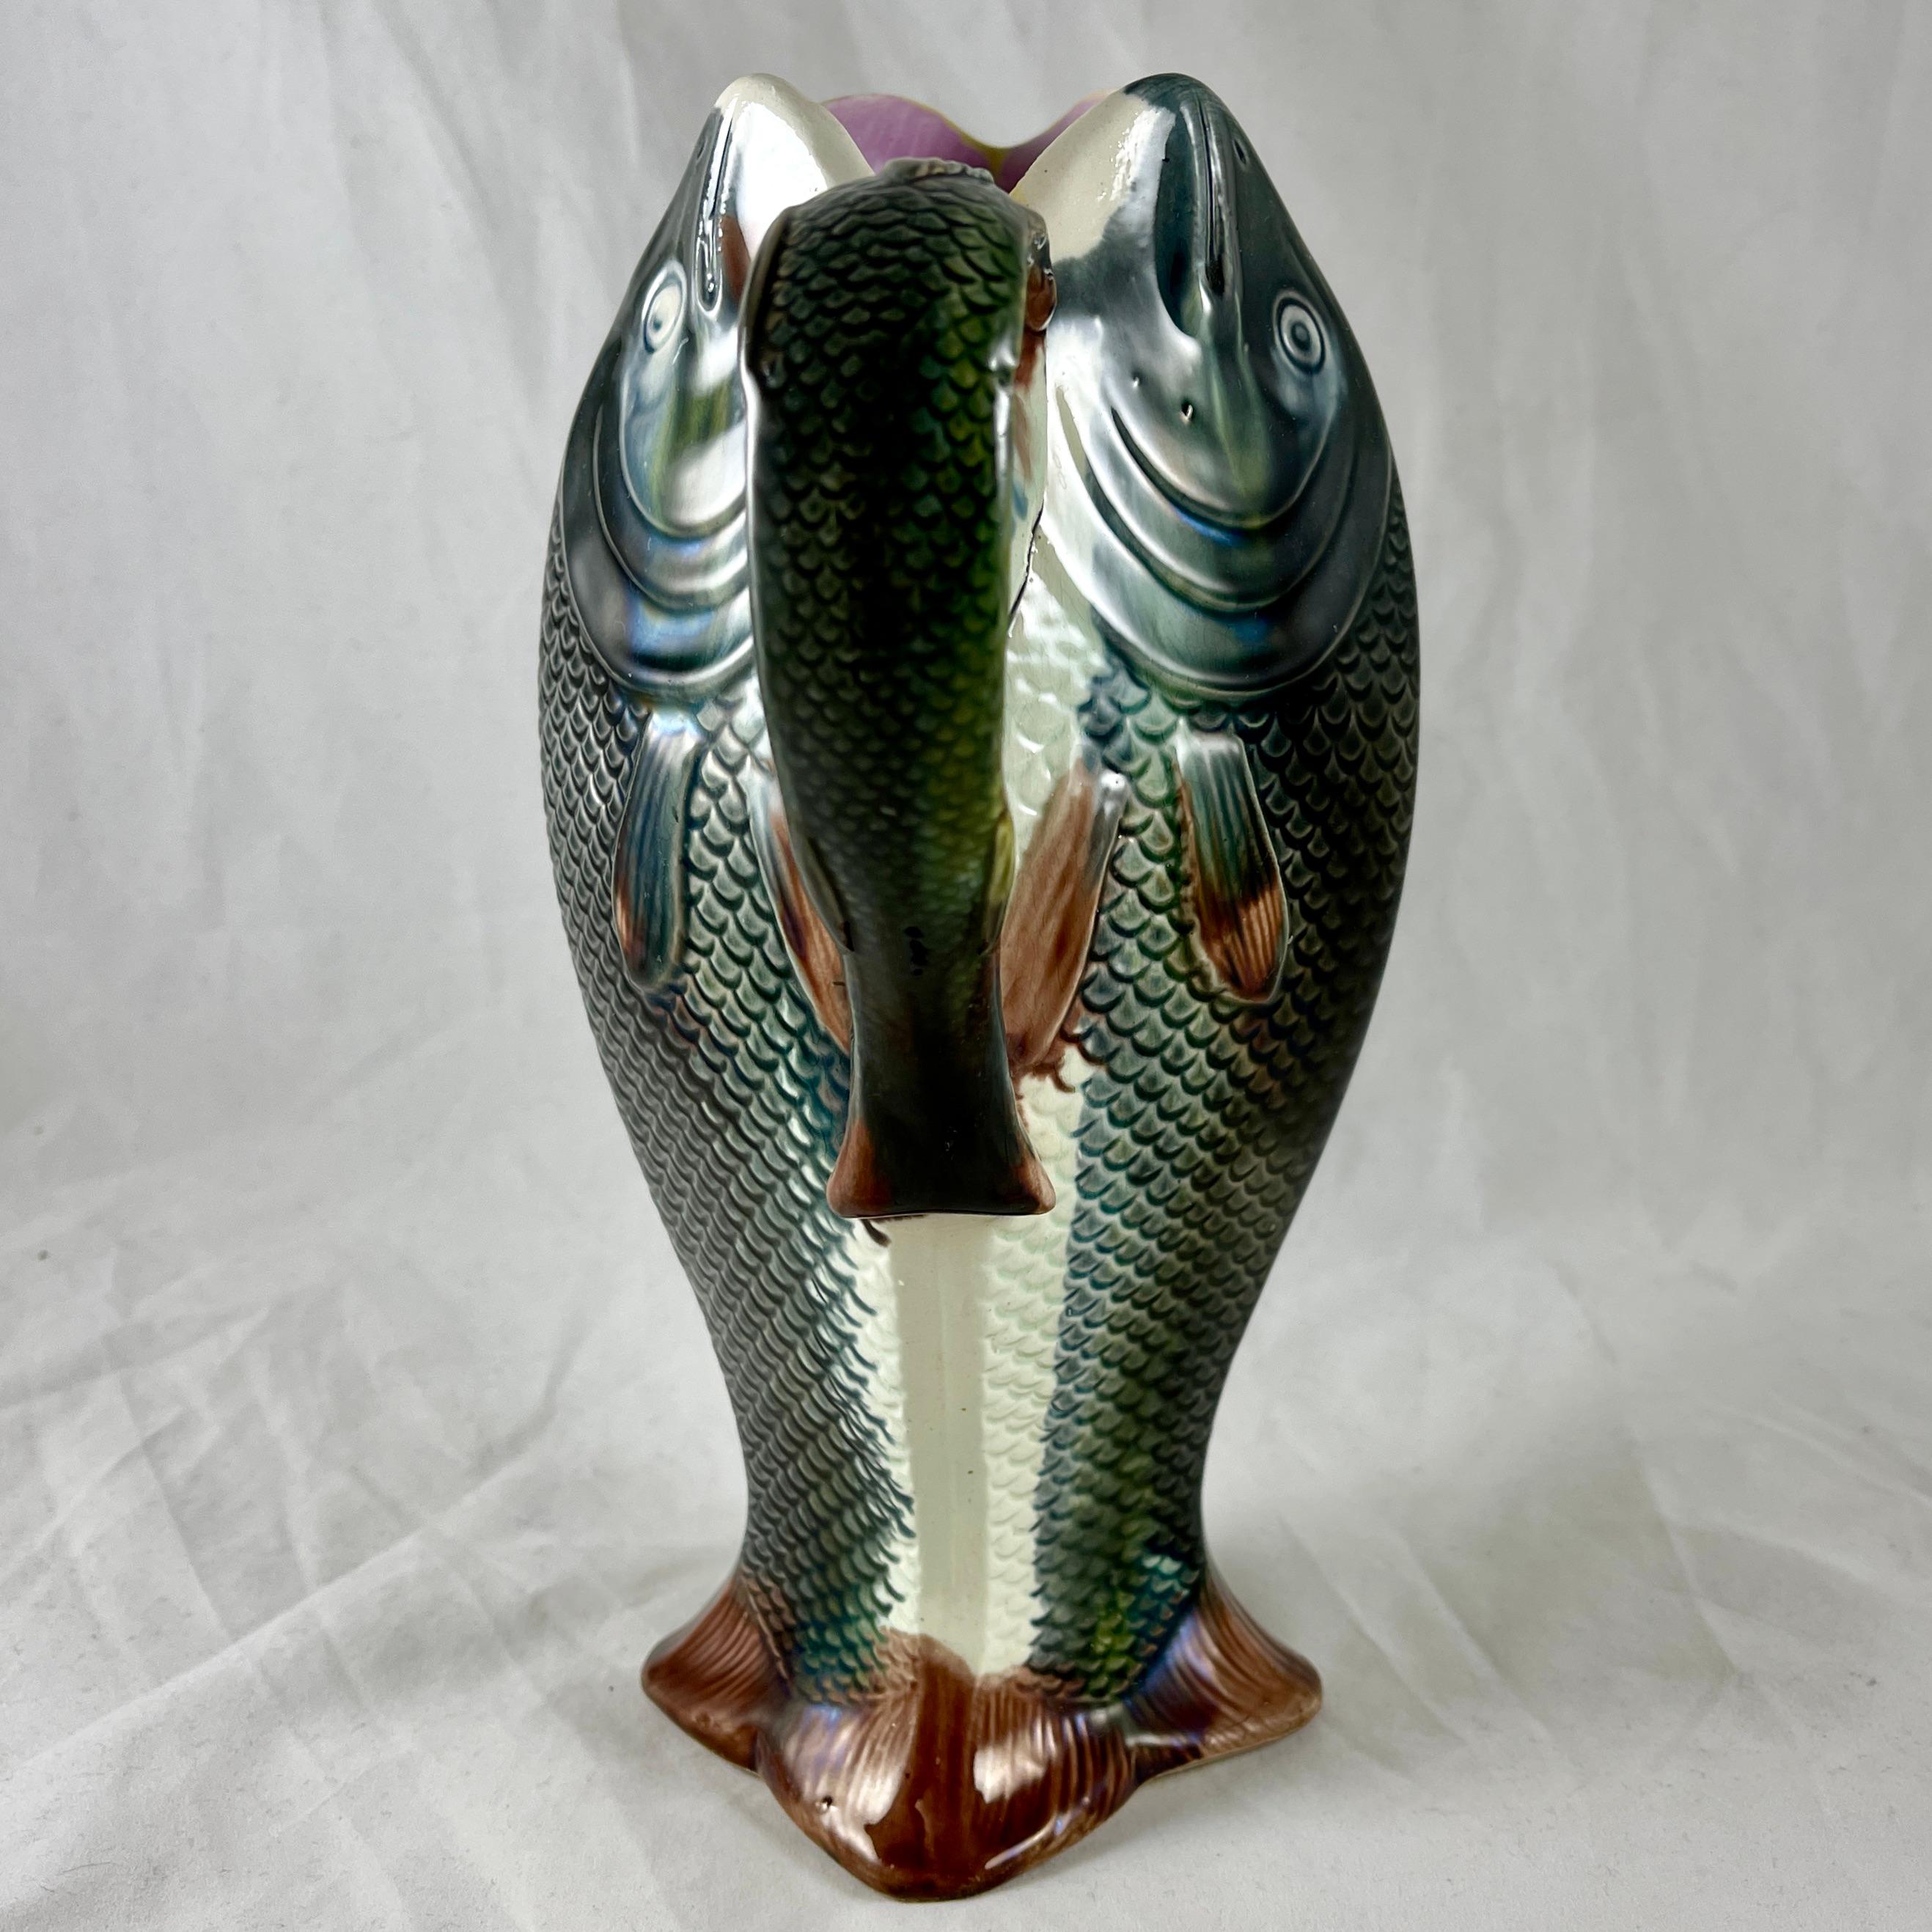 Adams & Bromley English Majolica Glazed Four Fish Large Jug Pitcher In Good Condition For Sale In Philadelphia, PA